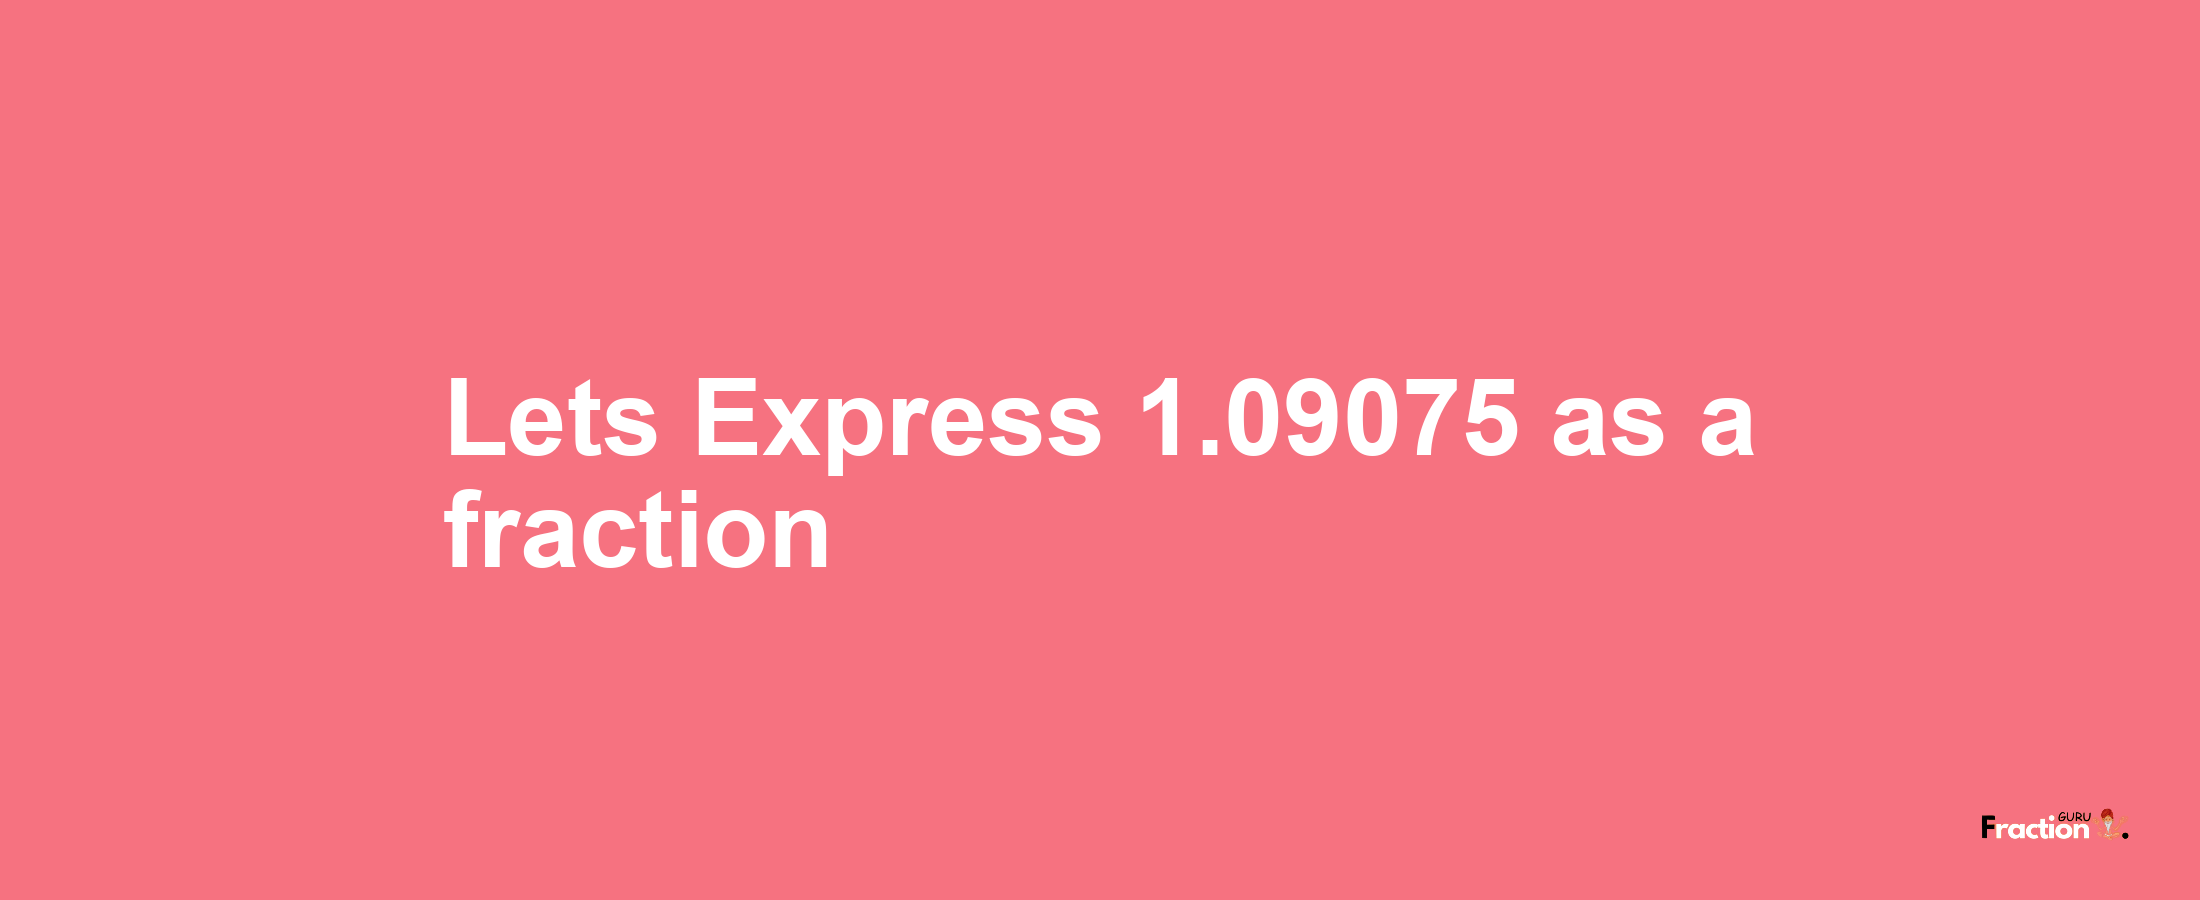 Lets Express 1.09075 as afraction